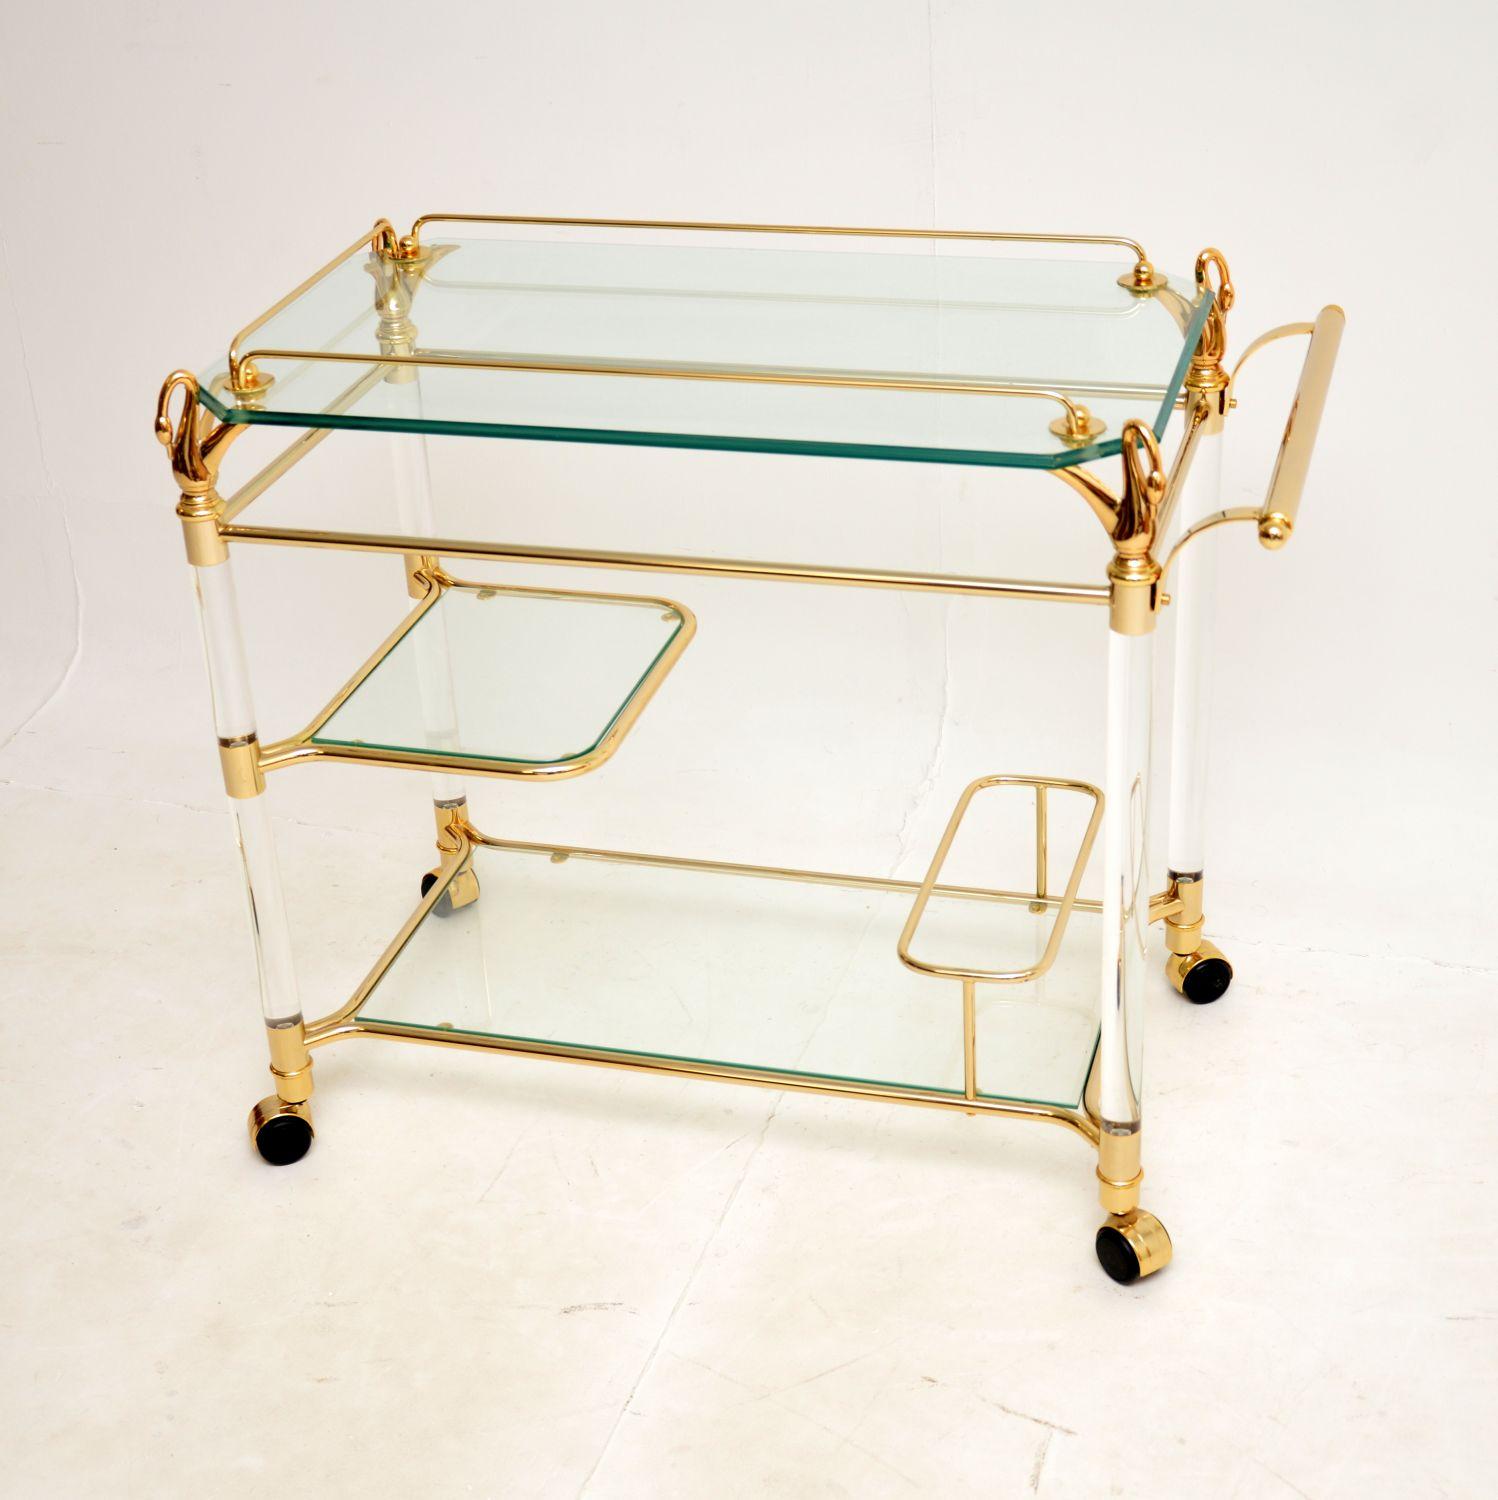 An absolutely stunning and very impressive vintage Hollywood Regency style drinks trolley. This was made in Spain, it dates from the 1970s-1980s.

The quality is outstanding, this has a clear lucite frame with gold plated fixtures. The top surface